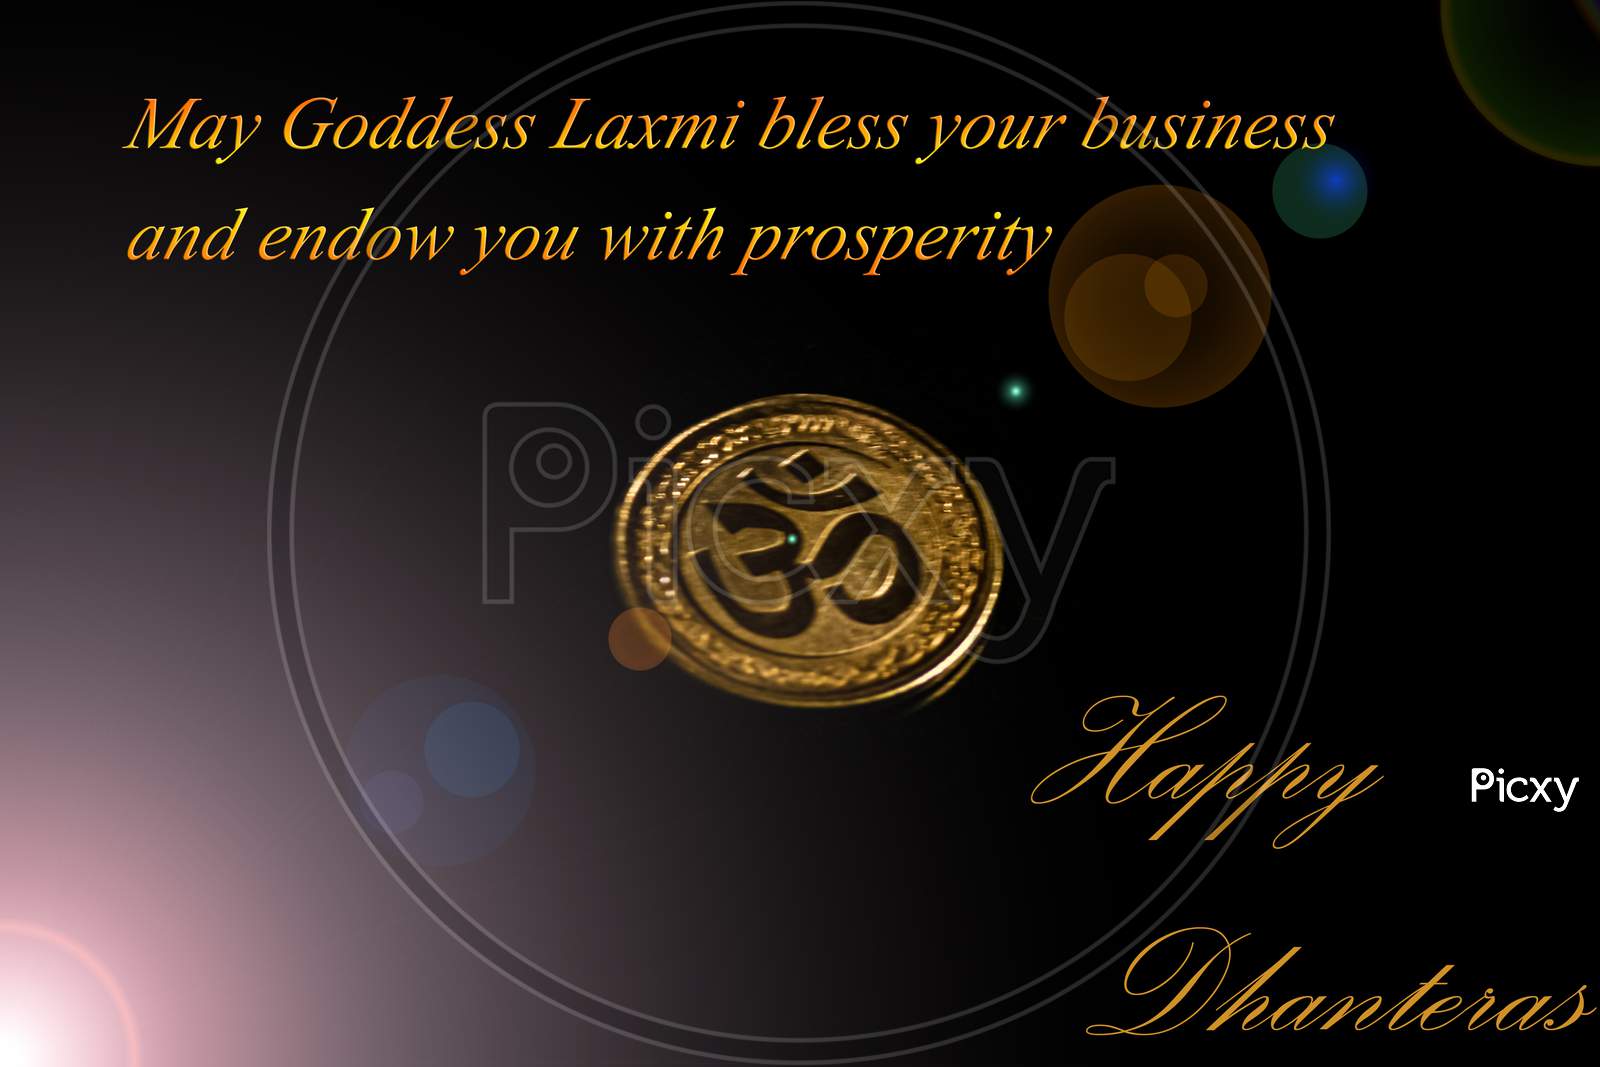 Illustration of Happy Dhanteras with a coin on a black background